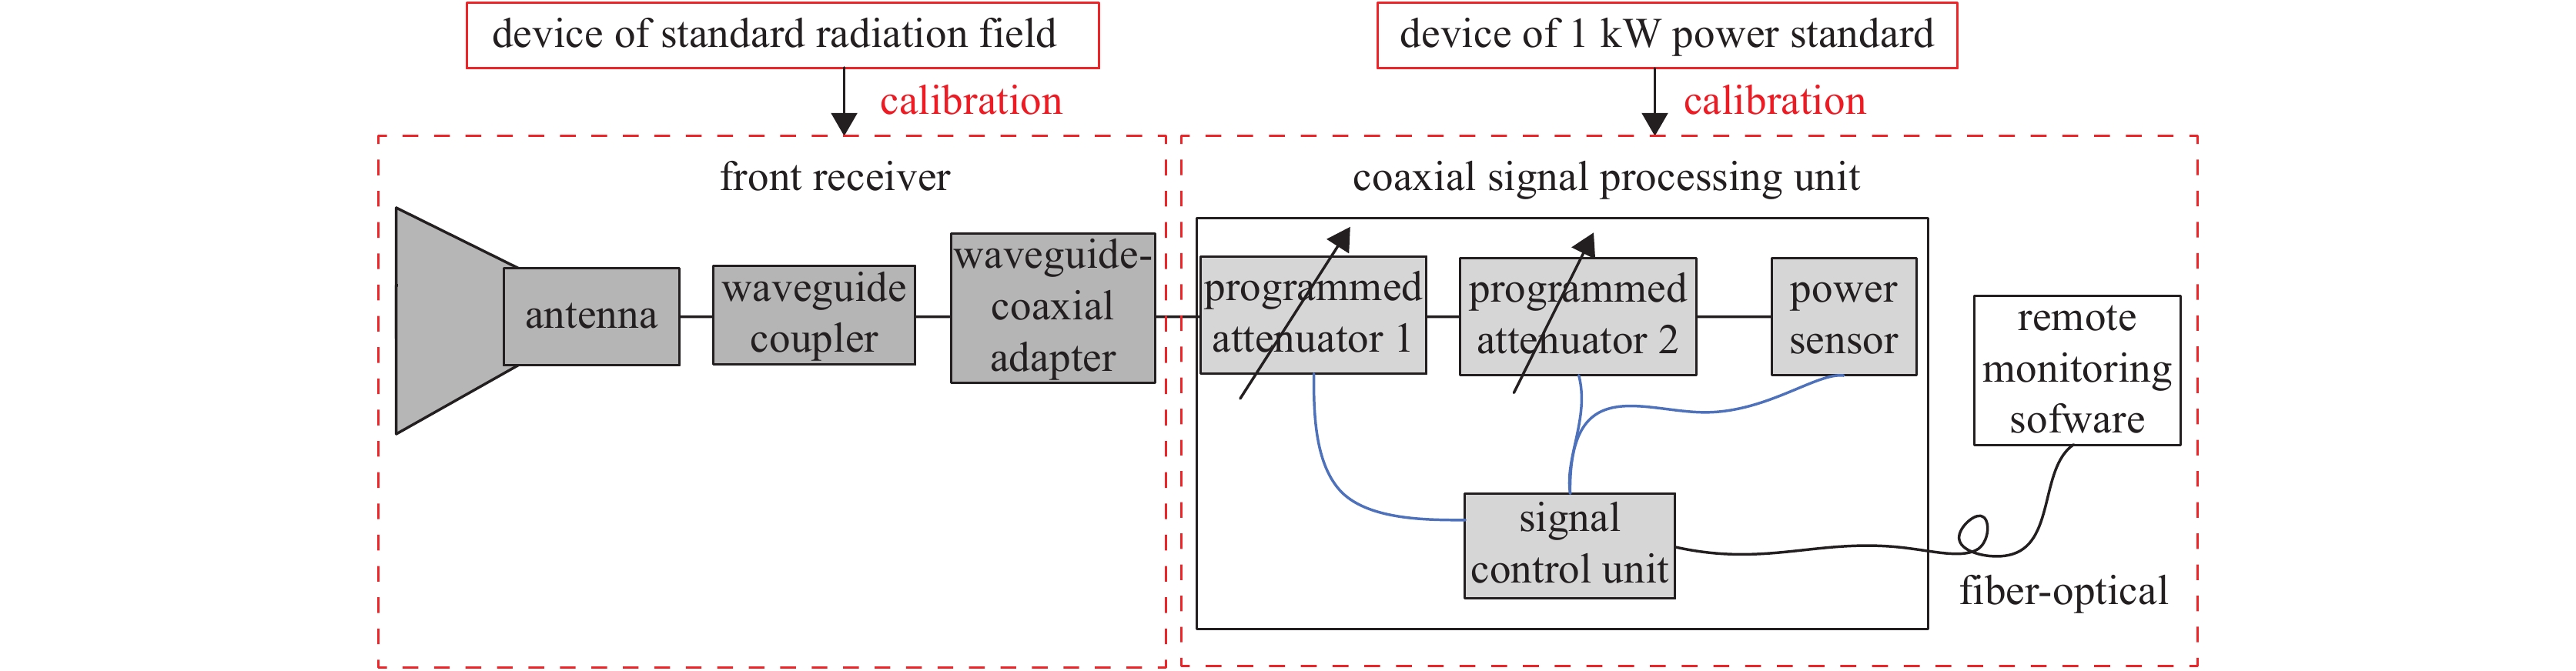 Structure diagram of high-power microwave radiation field measurement system